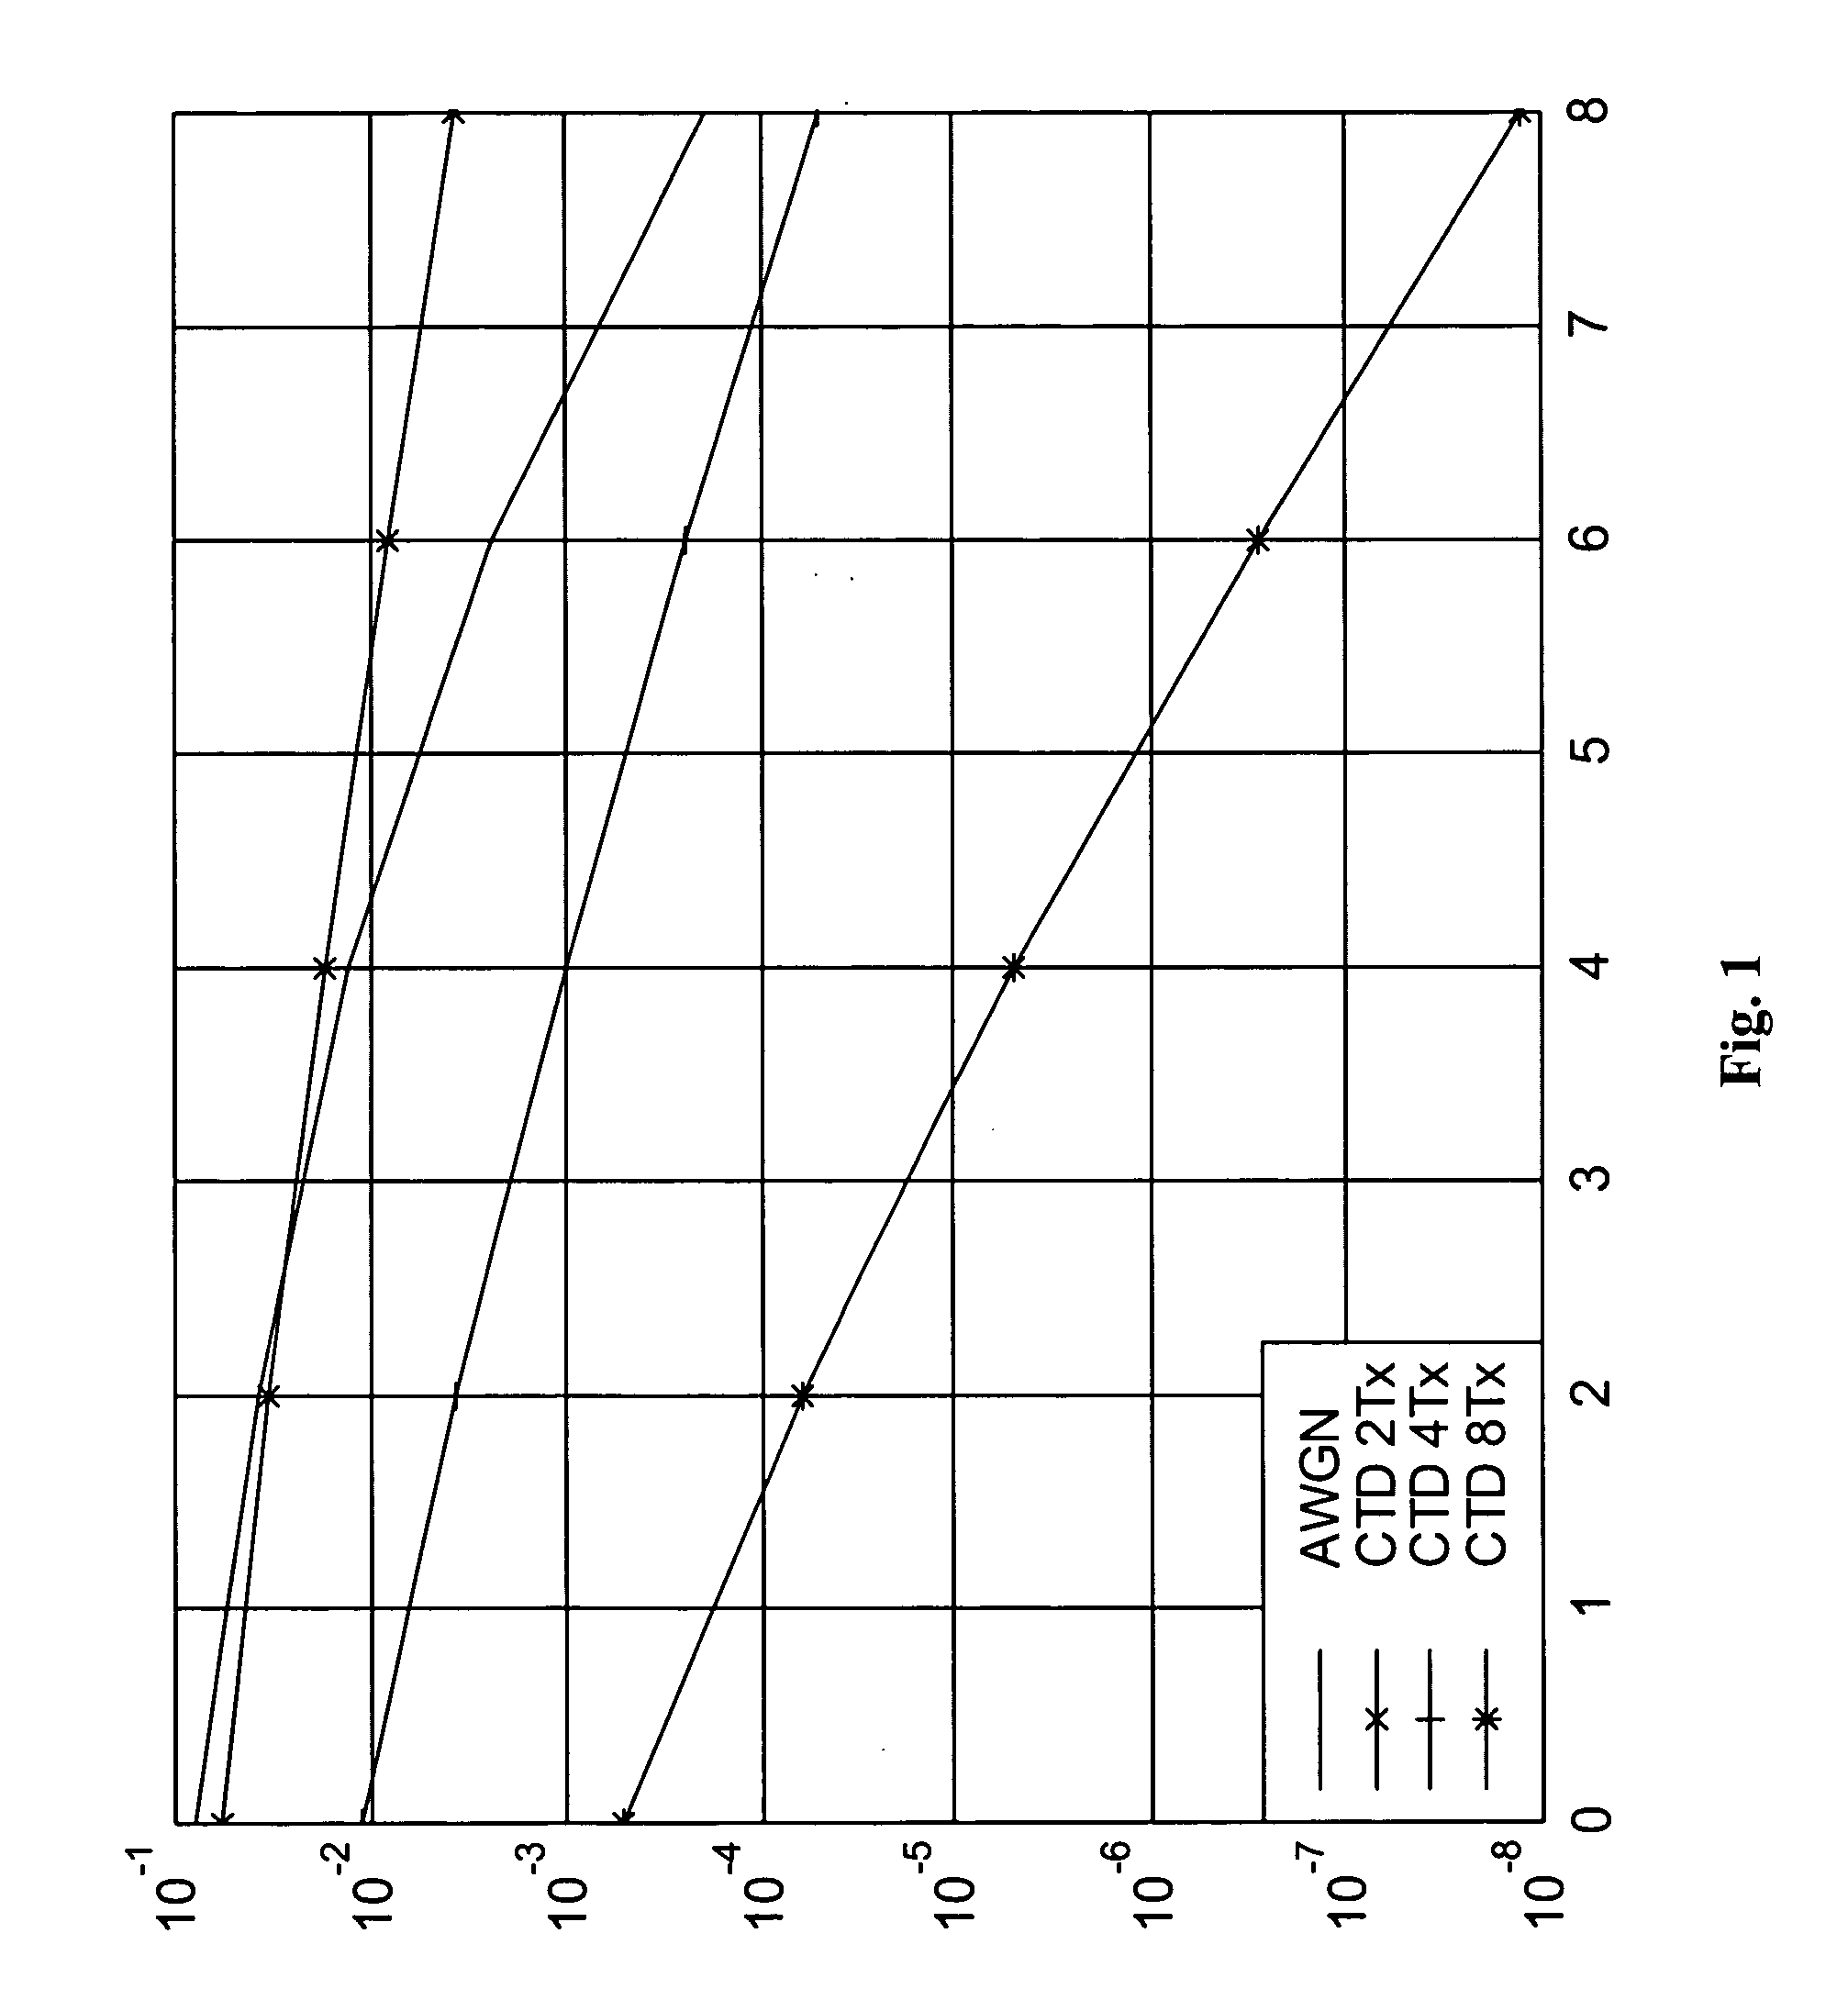 Signal transmitting method (variants) and device for carrying out said method